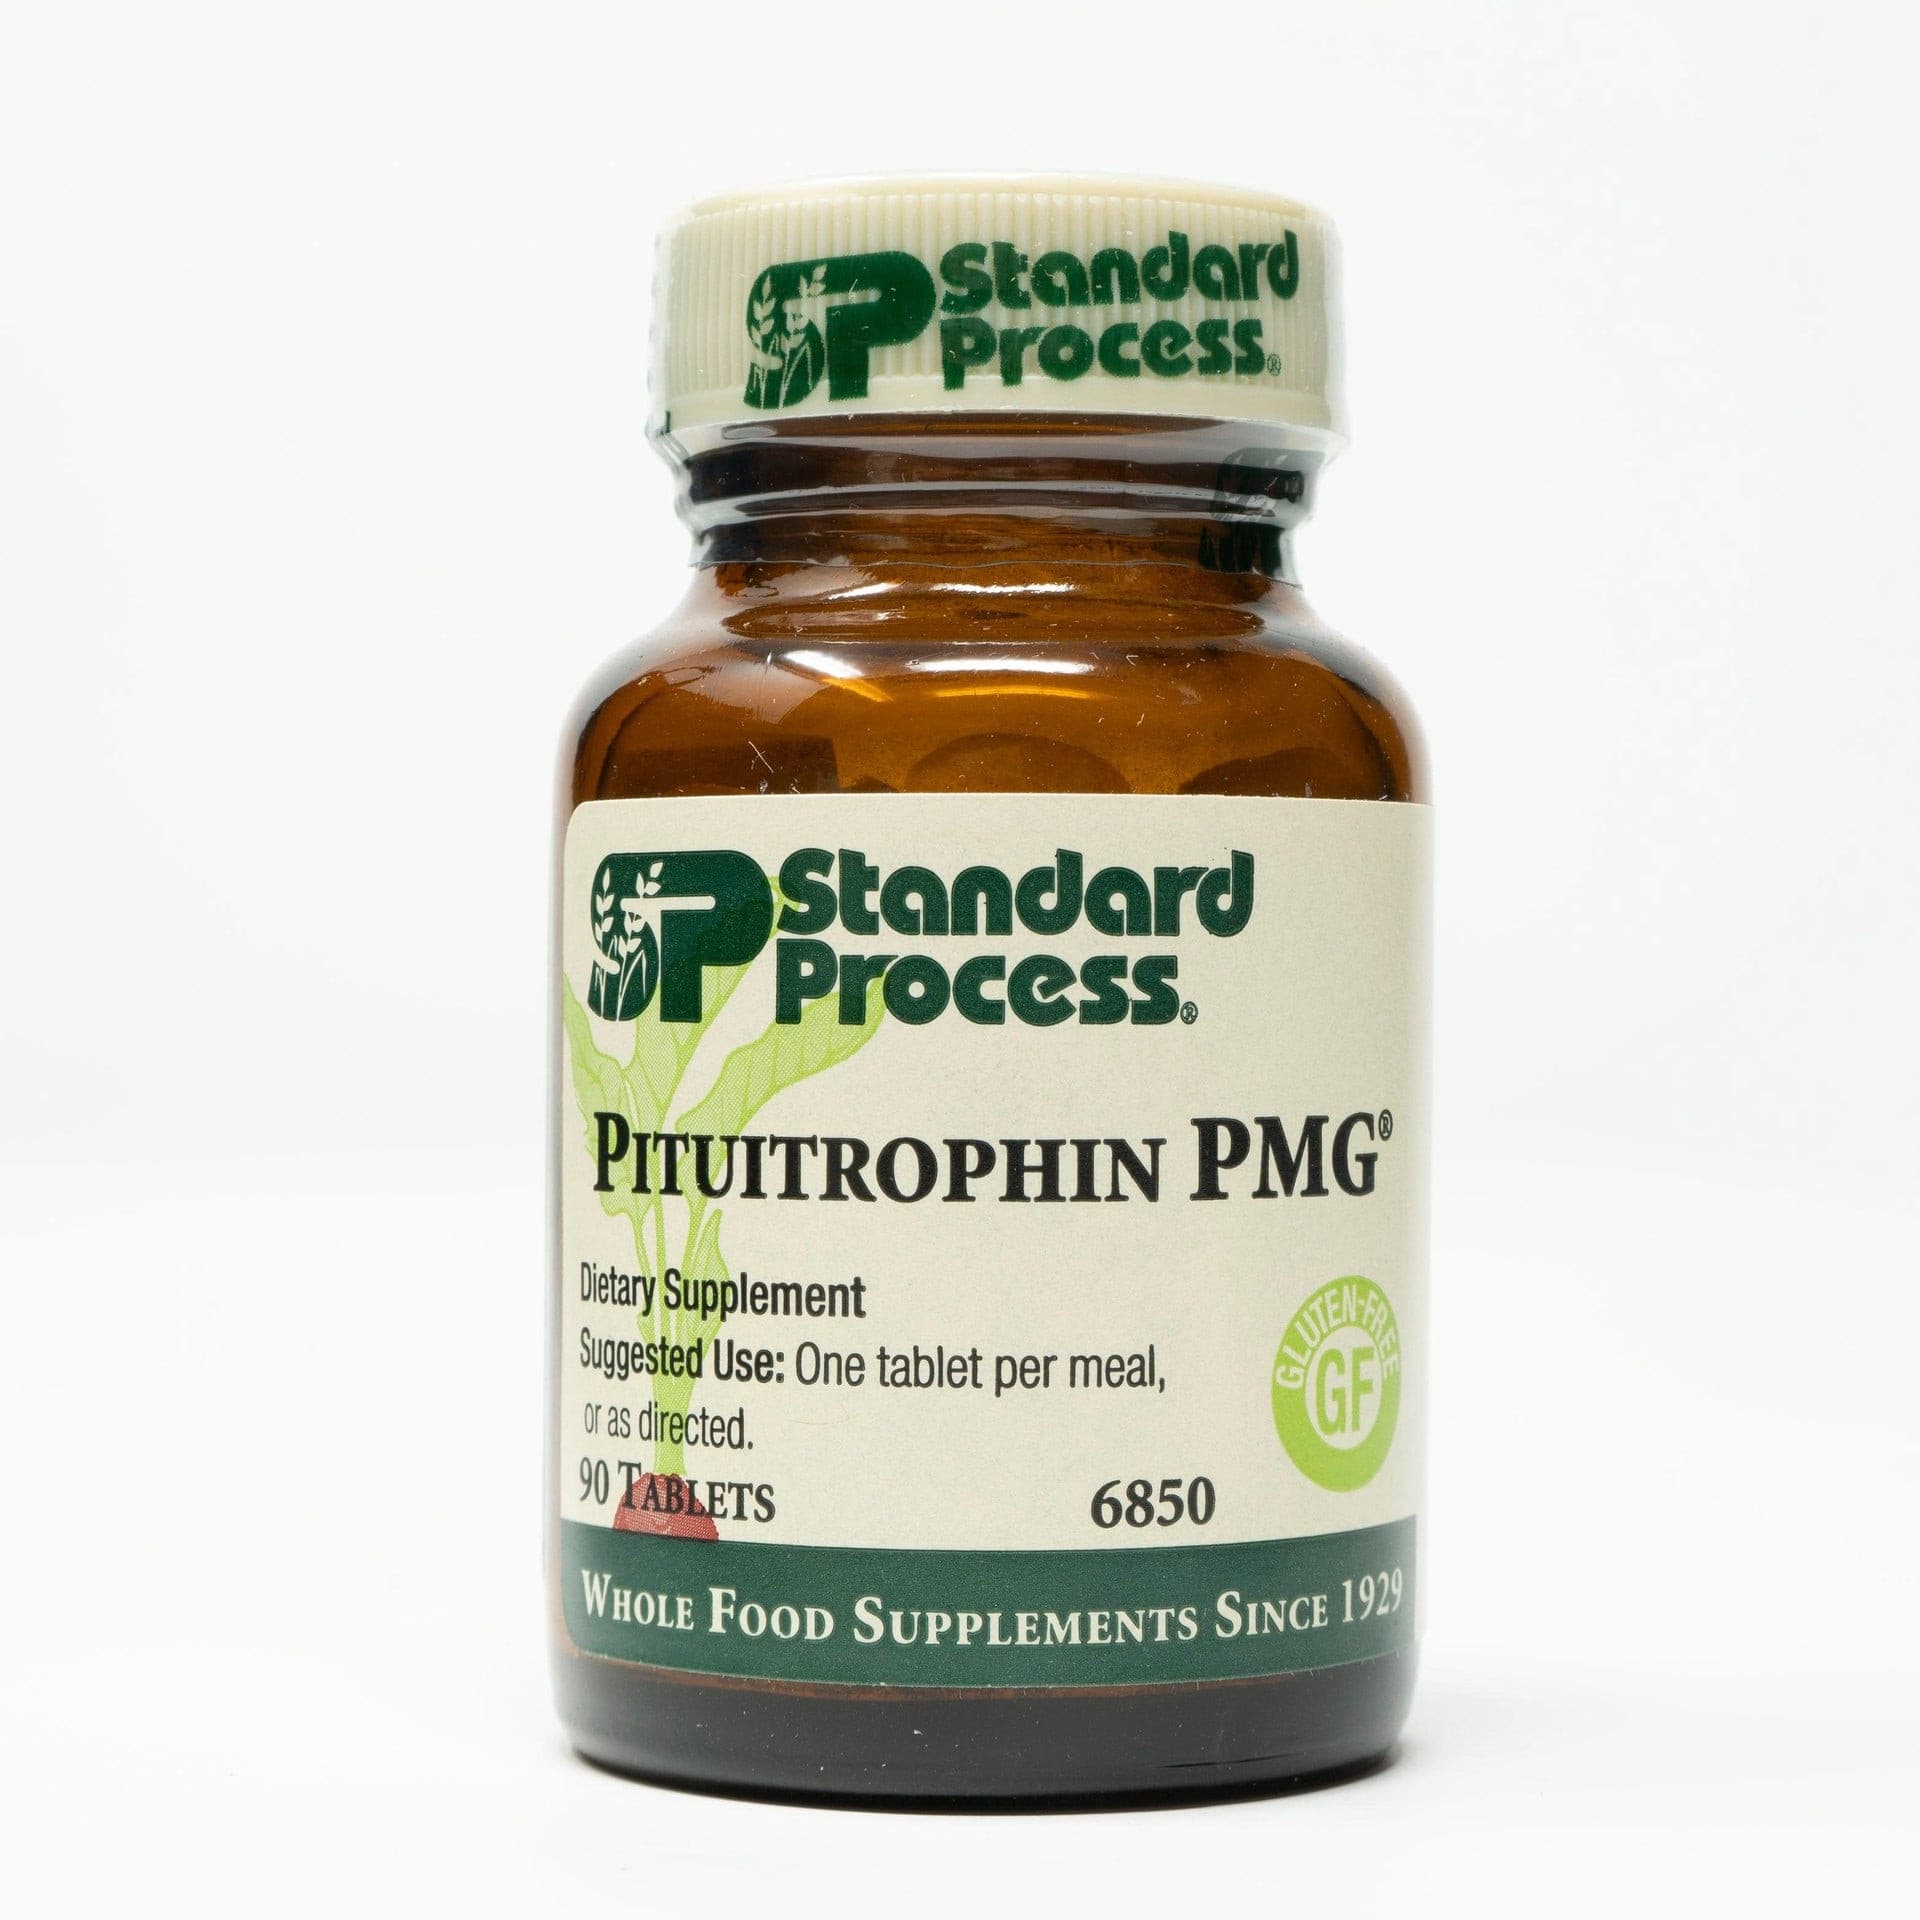 Pituitrophin PMG 90 Tablets.